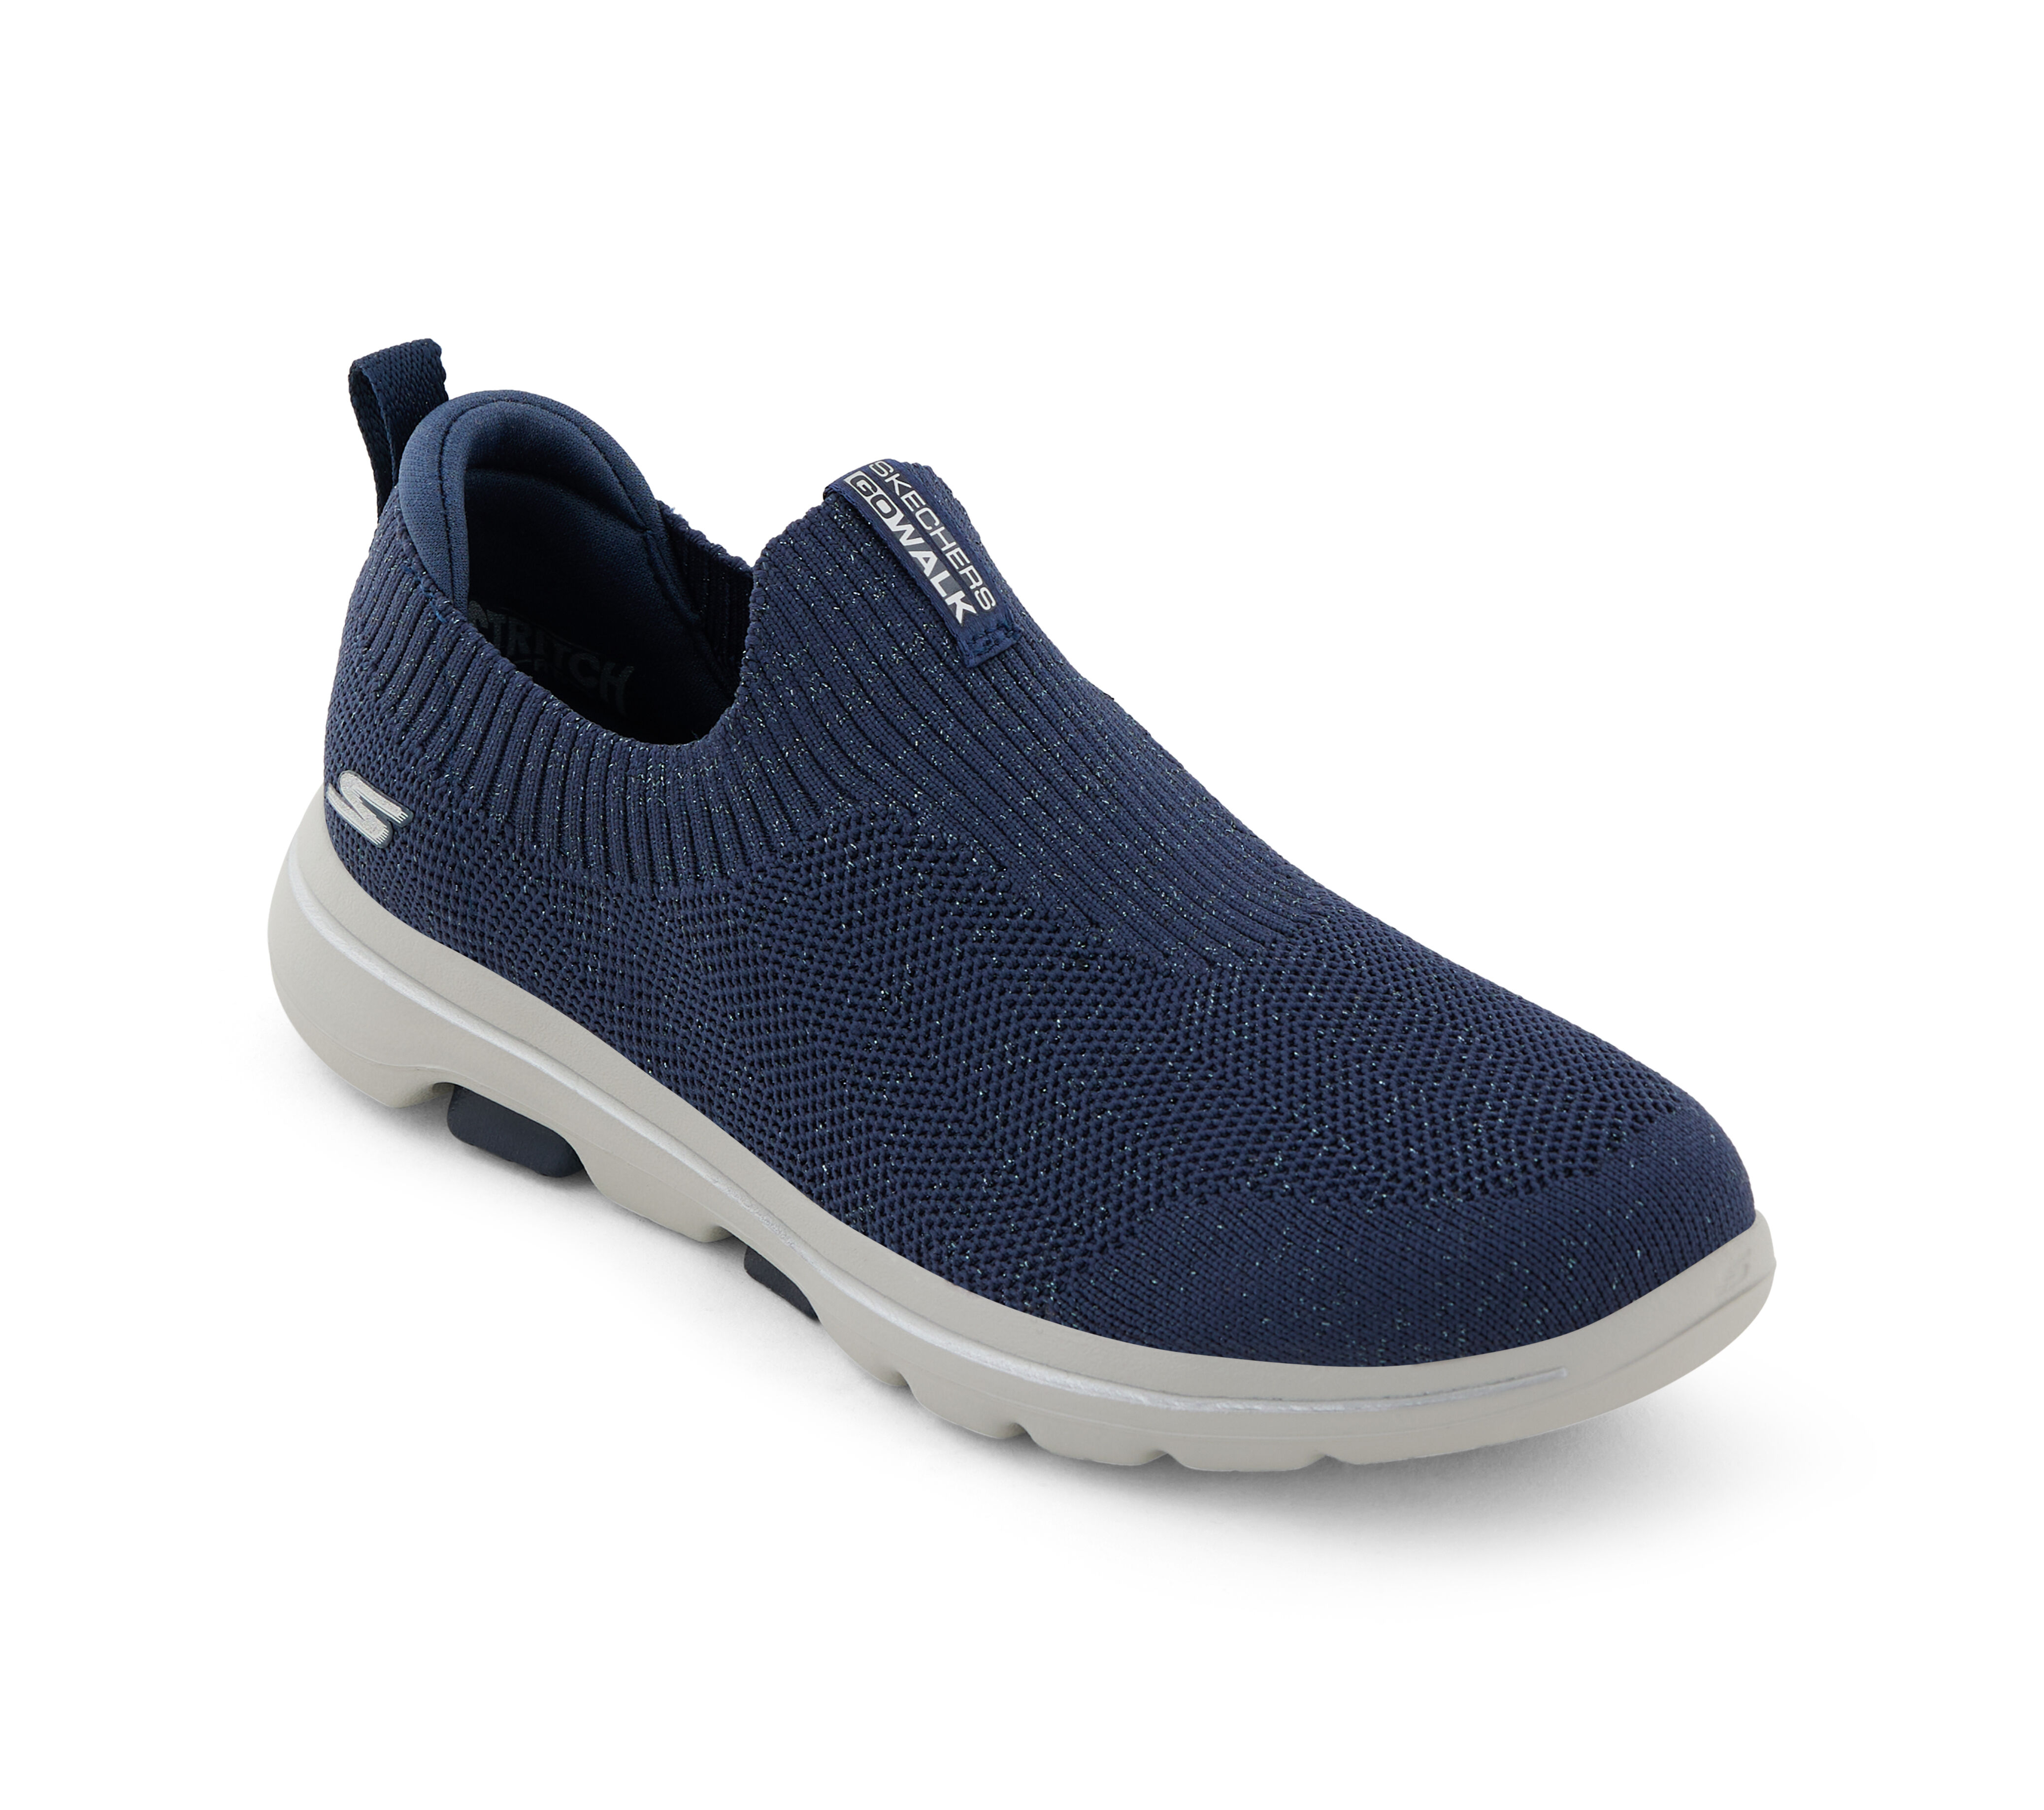 skechers air cooled goga mat shoes price